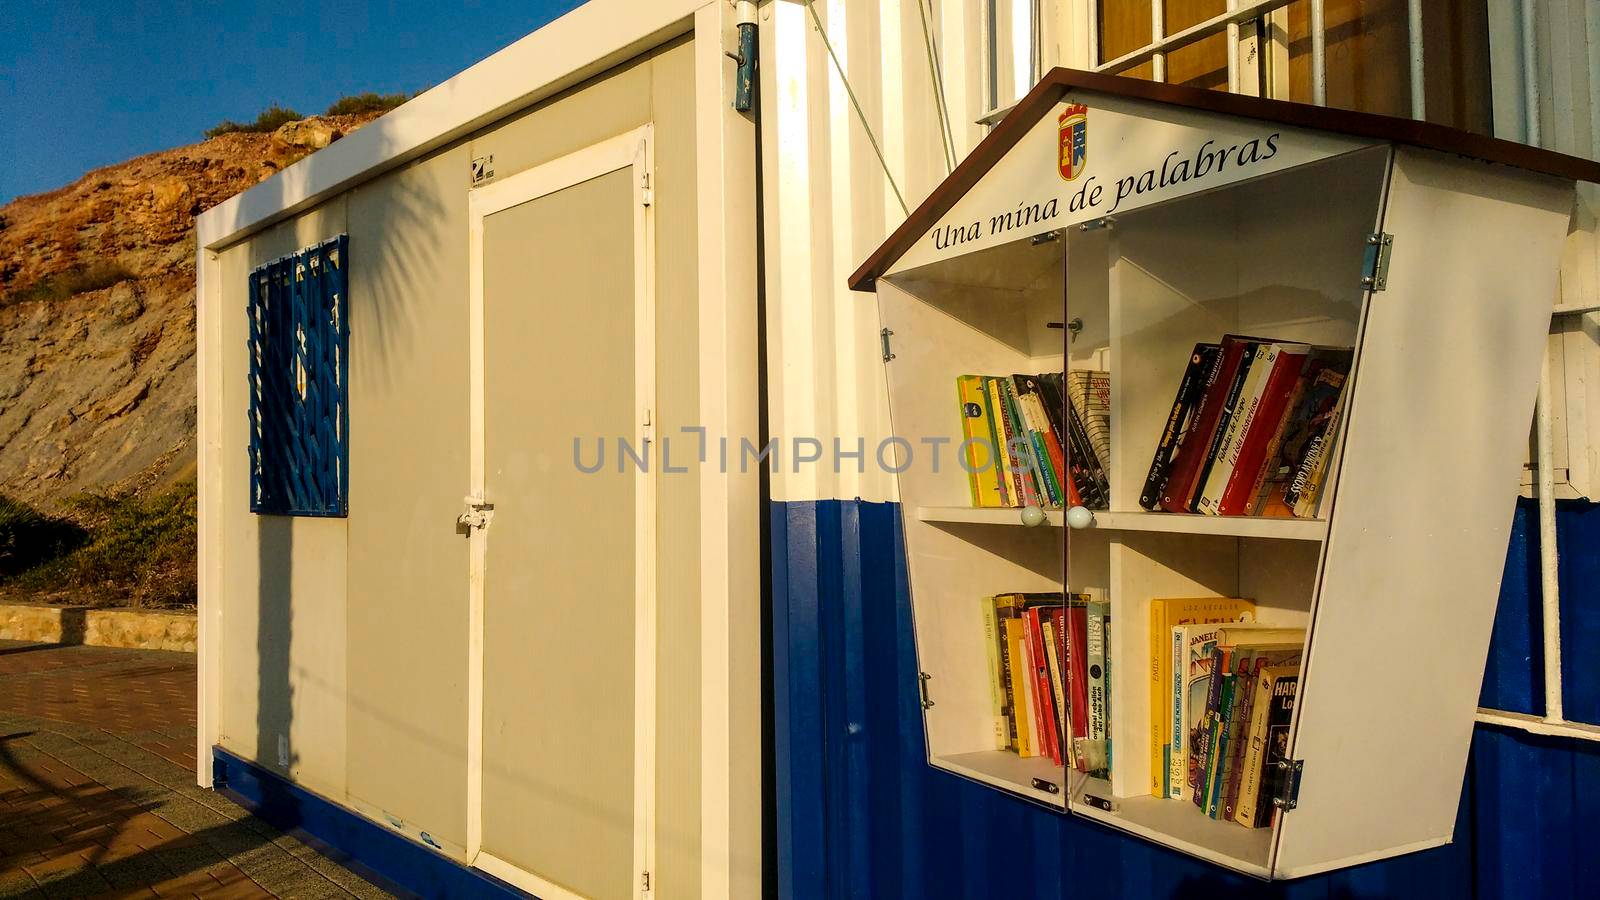 Portman, Cartagena, Spain- July 19, 2021: Street library available to the public on the beach of Portman village in summer